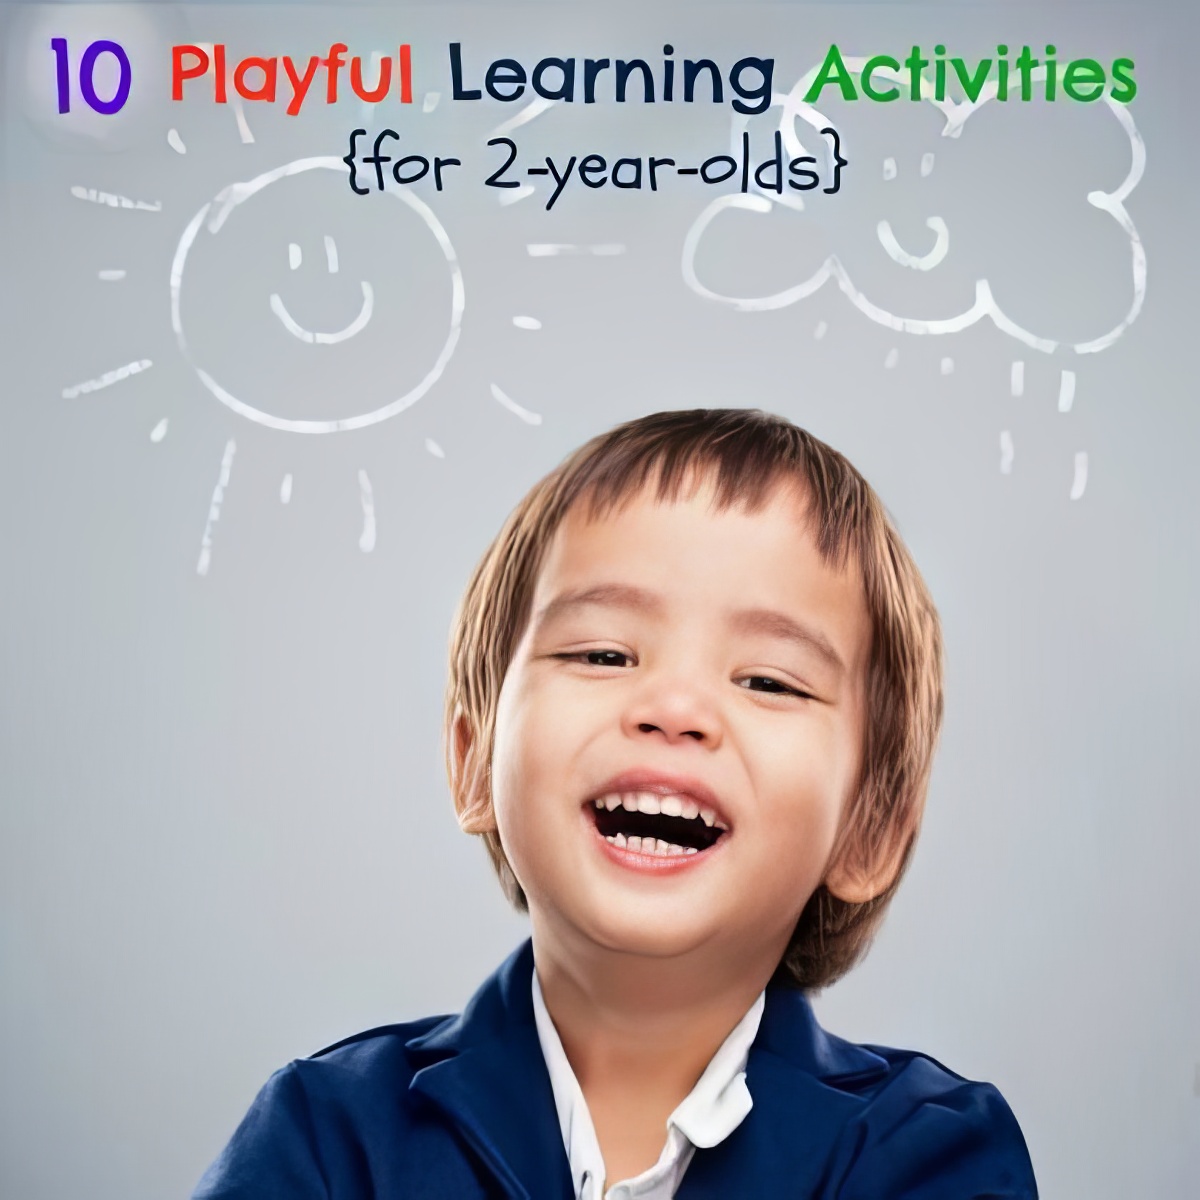 420 Updated 10 Playful Learning Activities for 2 year olds